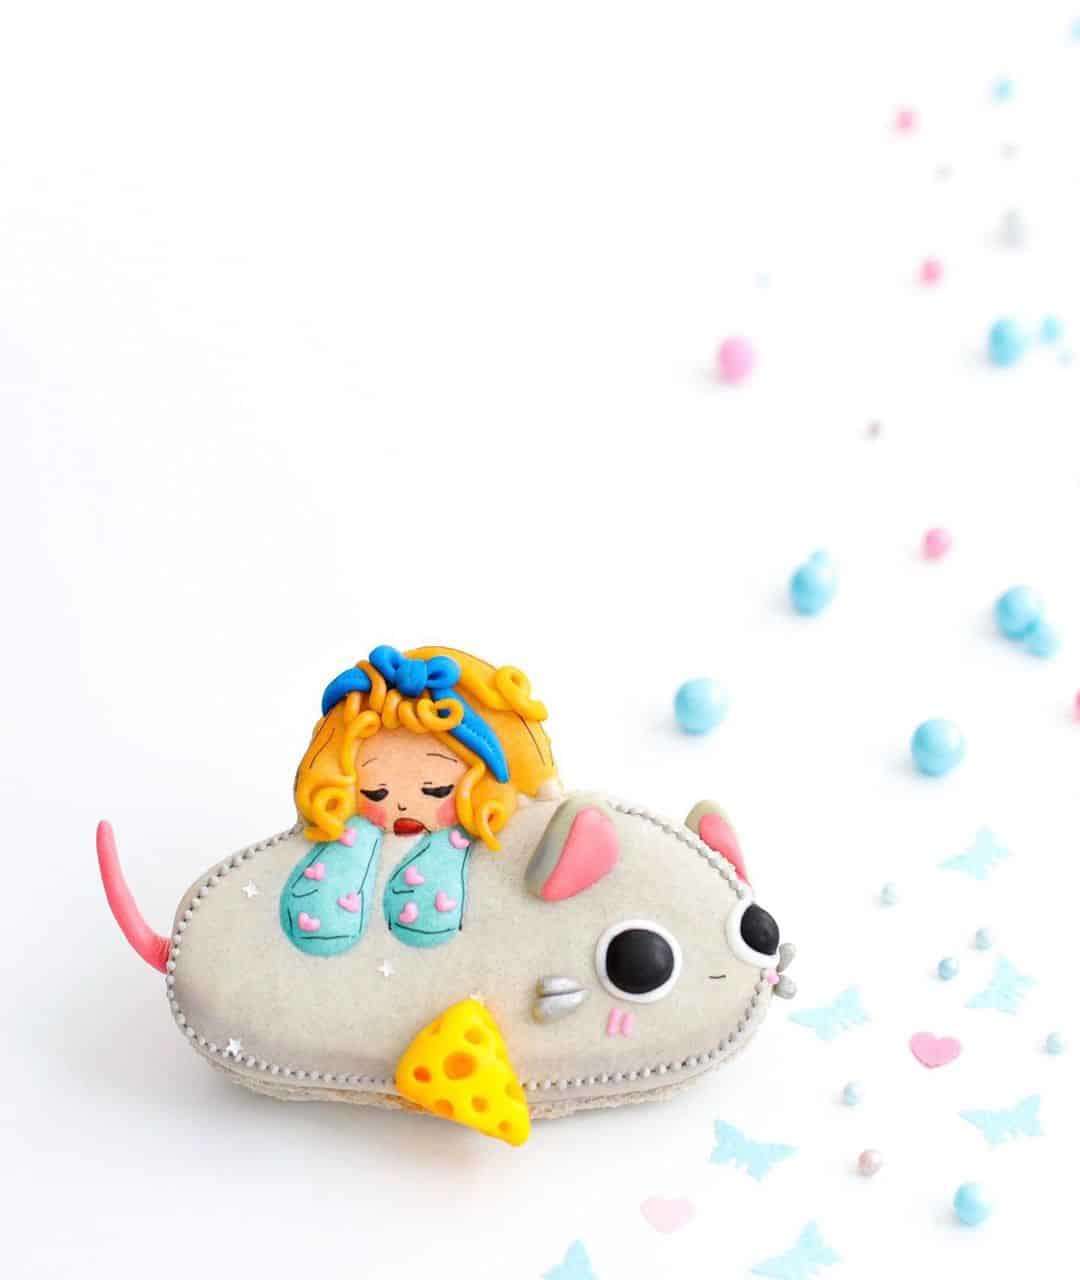 Talented Baker Creates Extremely Cute Macaron Designs